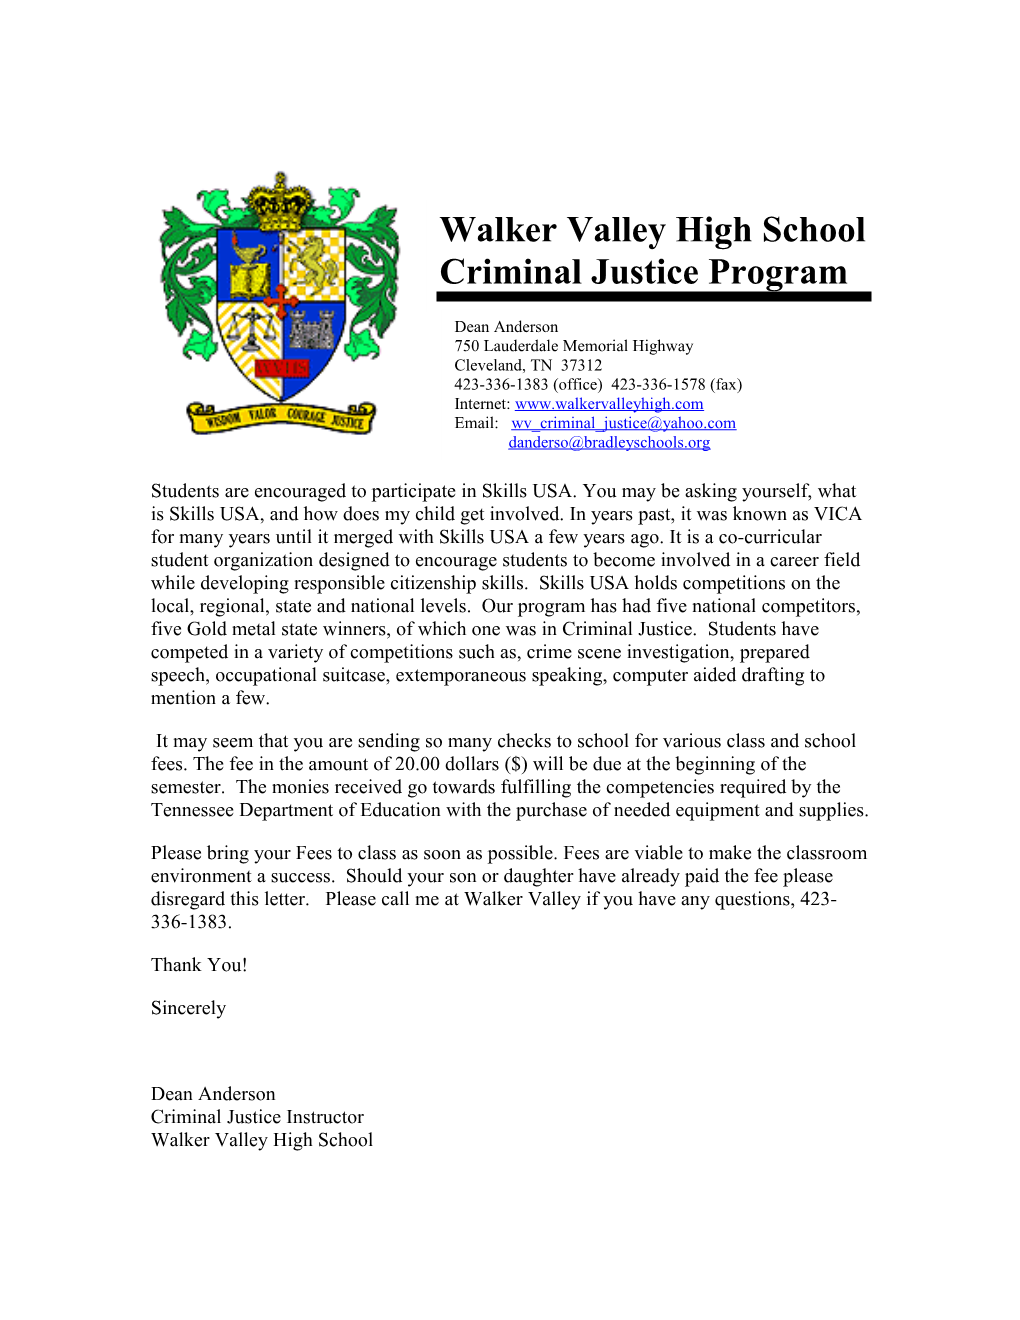 The Criminal Justice Program at Walkervalleyhigh School Seeks to Prepare Students to Work